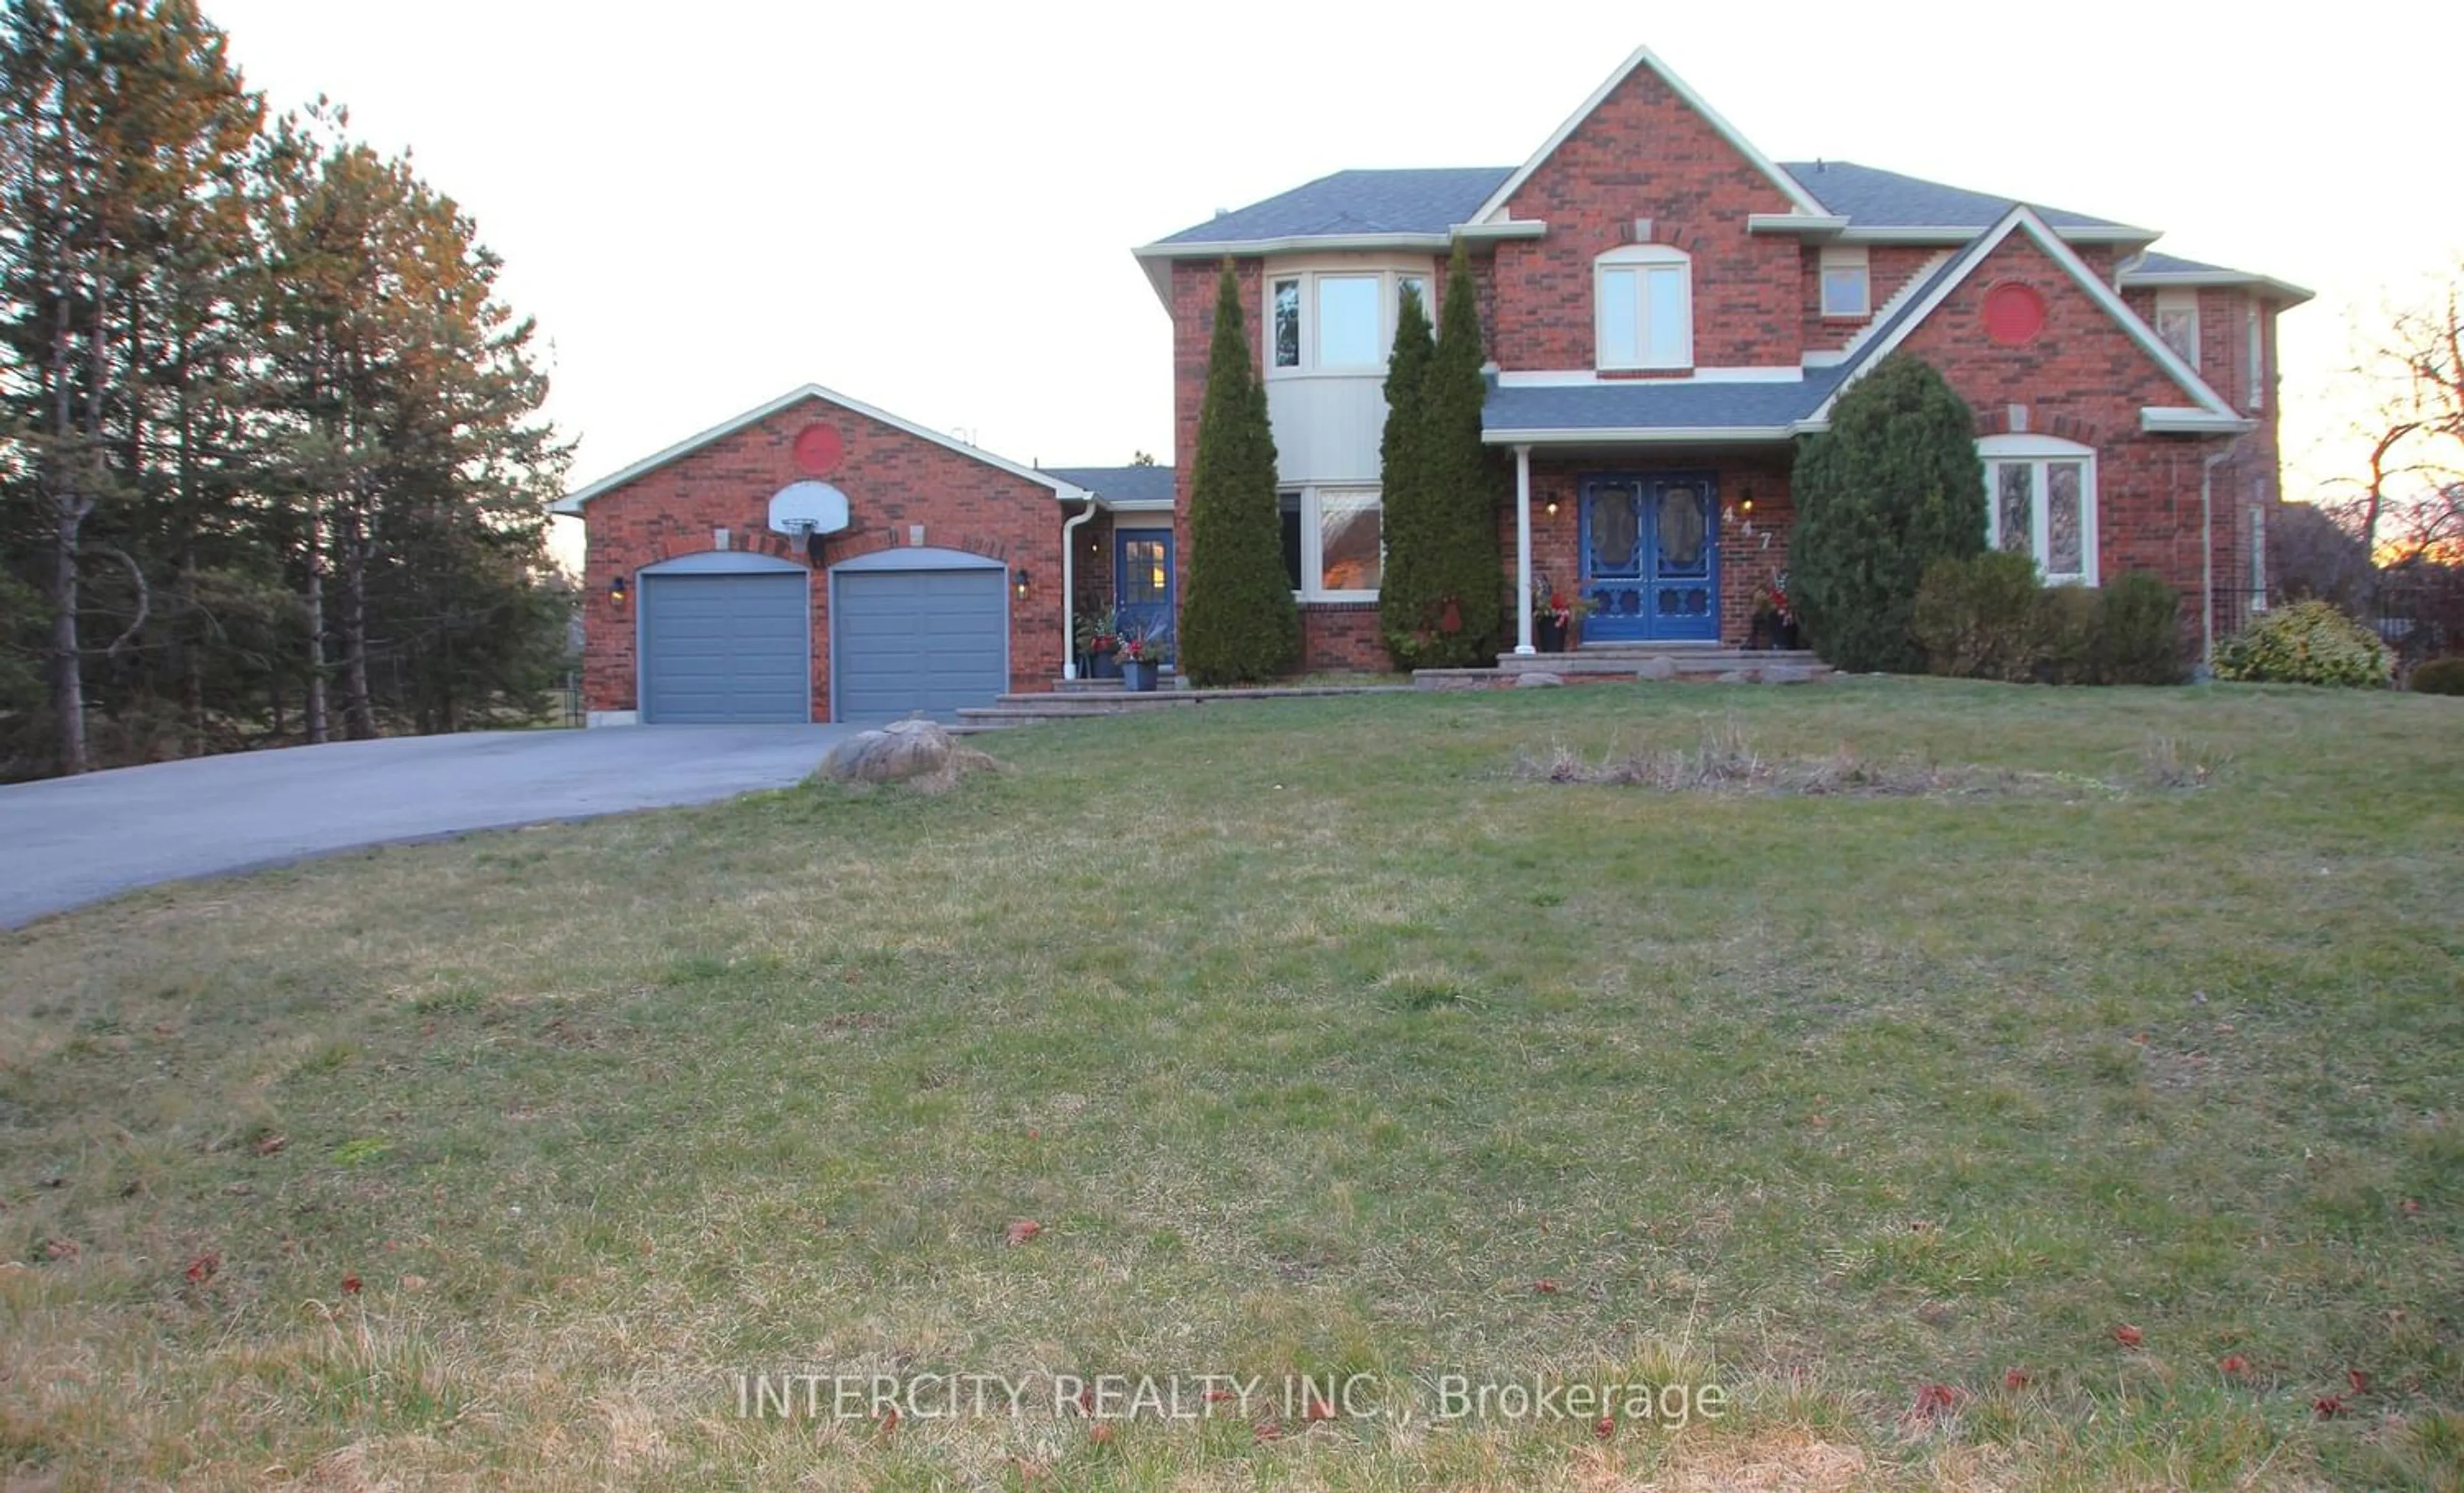 Frontside or backside of a home for 447 Cam Fella Blvd, Whitchurch-Stouffville Ontario L4A 7G9